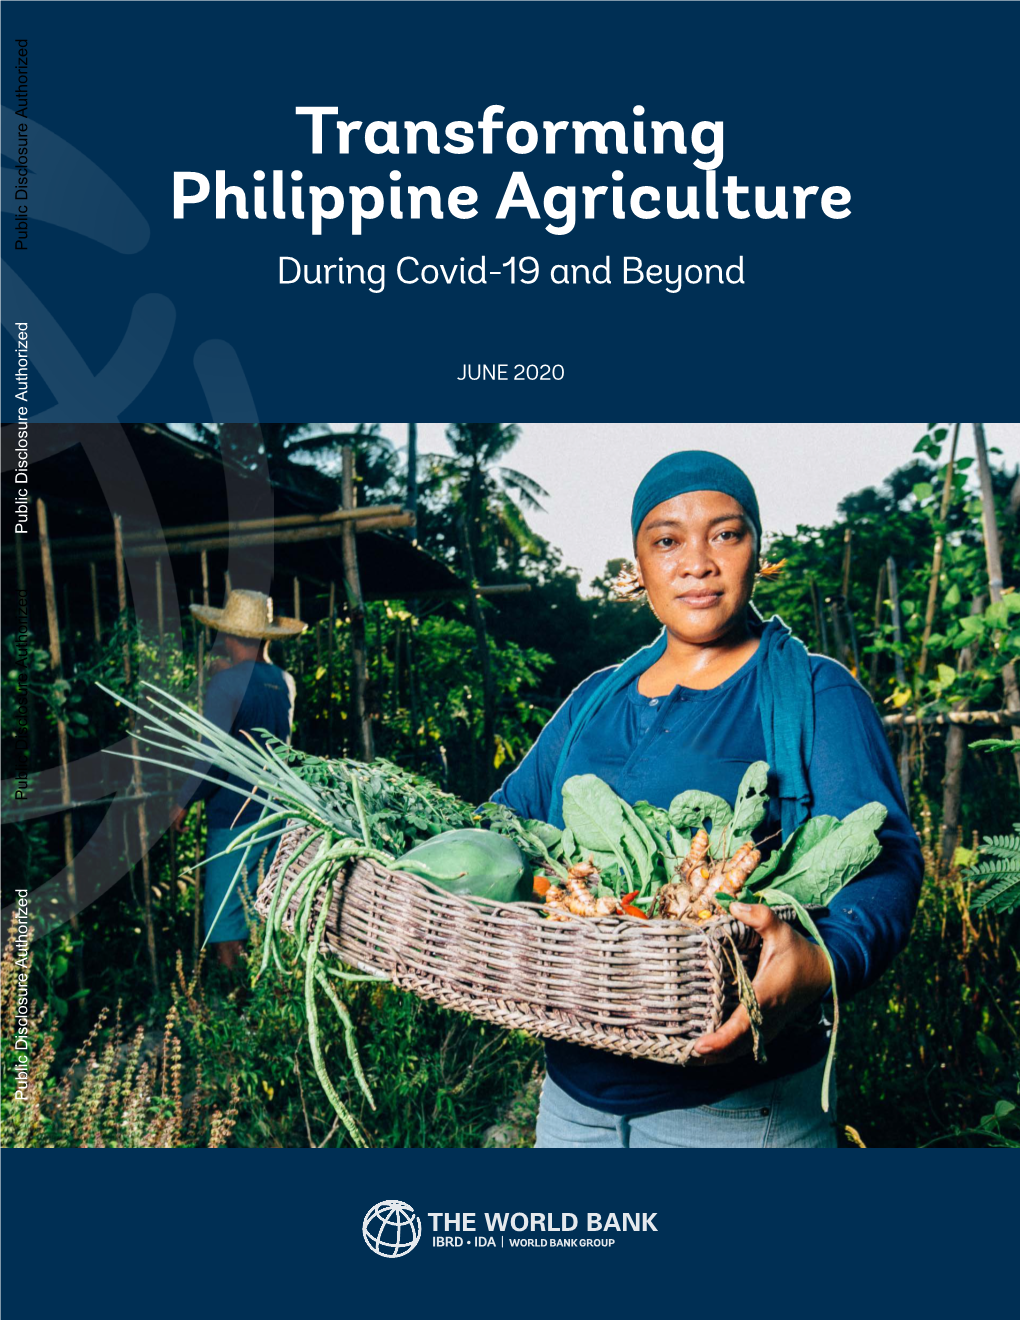 Transforming Philippine Agriculture During Covid-19 and Beyond